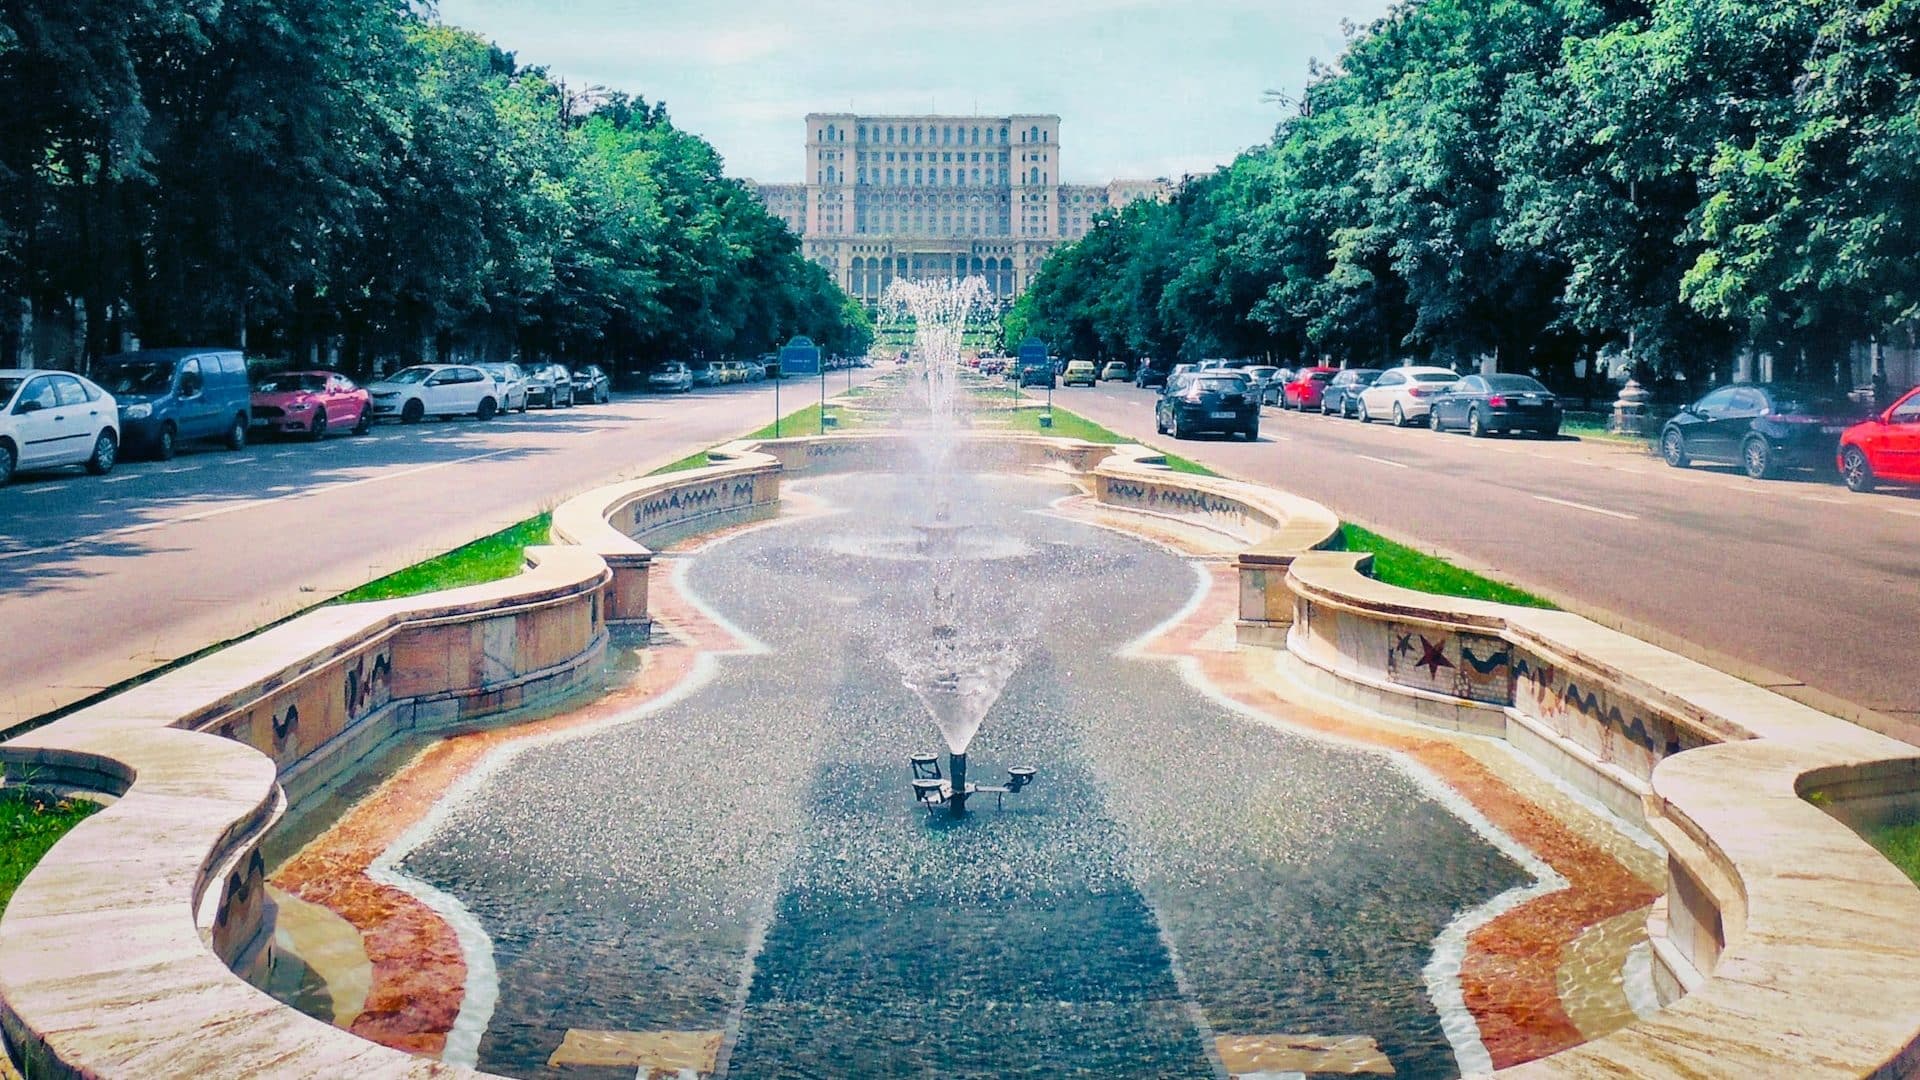 Located in the heart of the city, Unirii Boulevard and the Parliament Building area are among the best locations in Bucharest for tourists